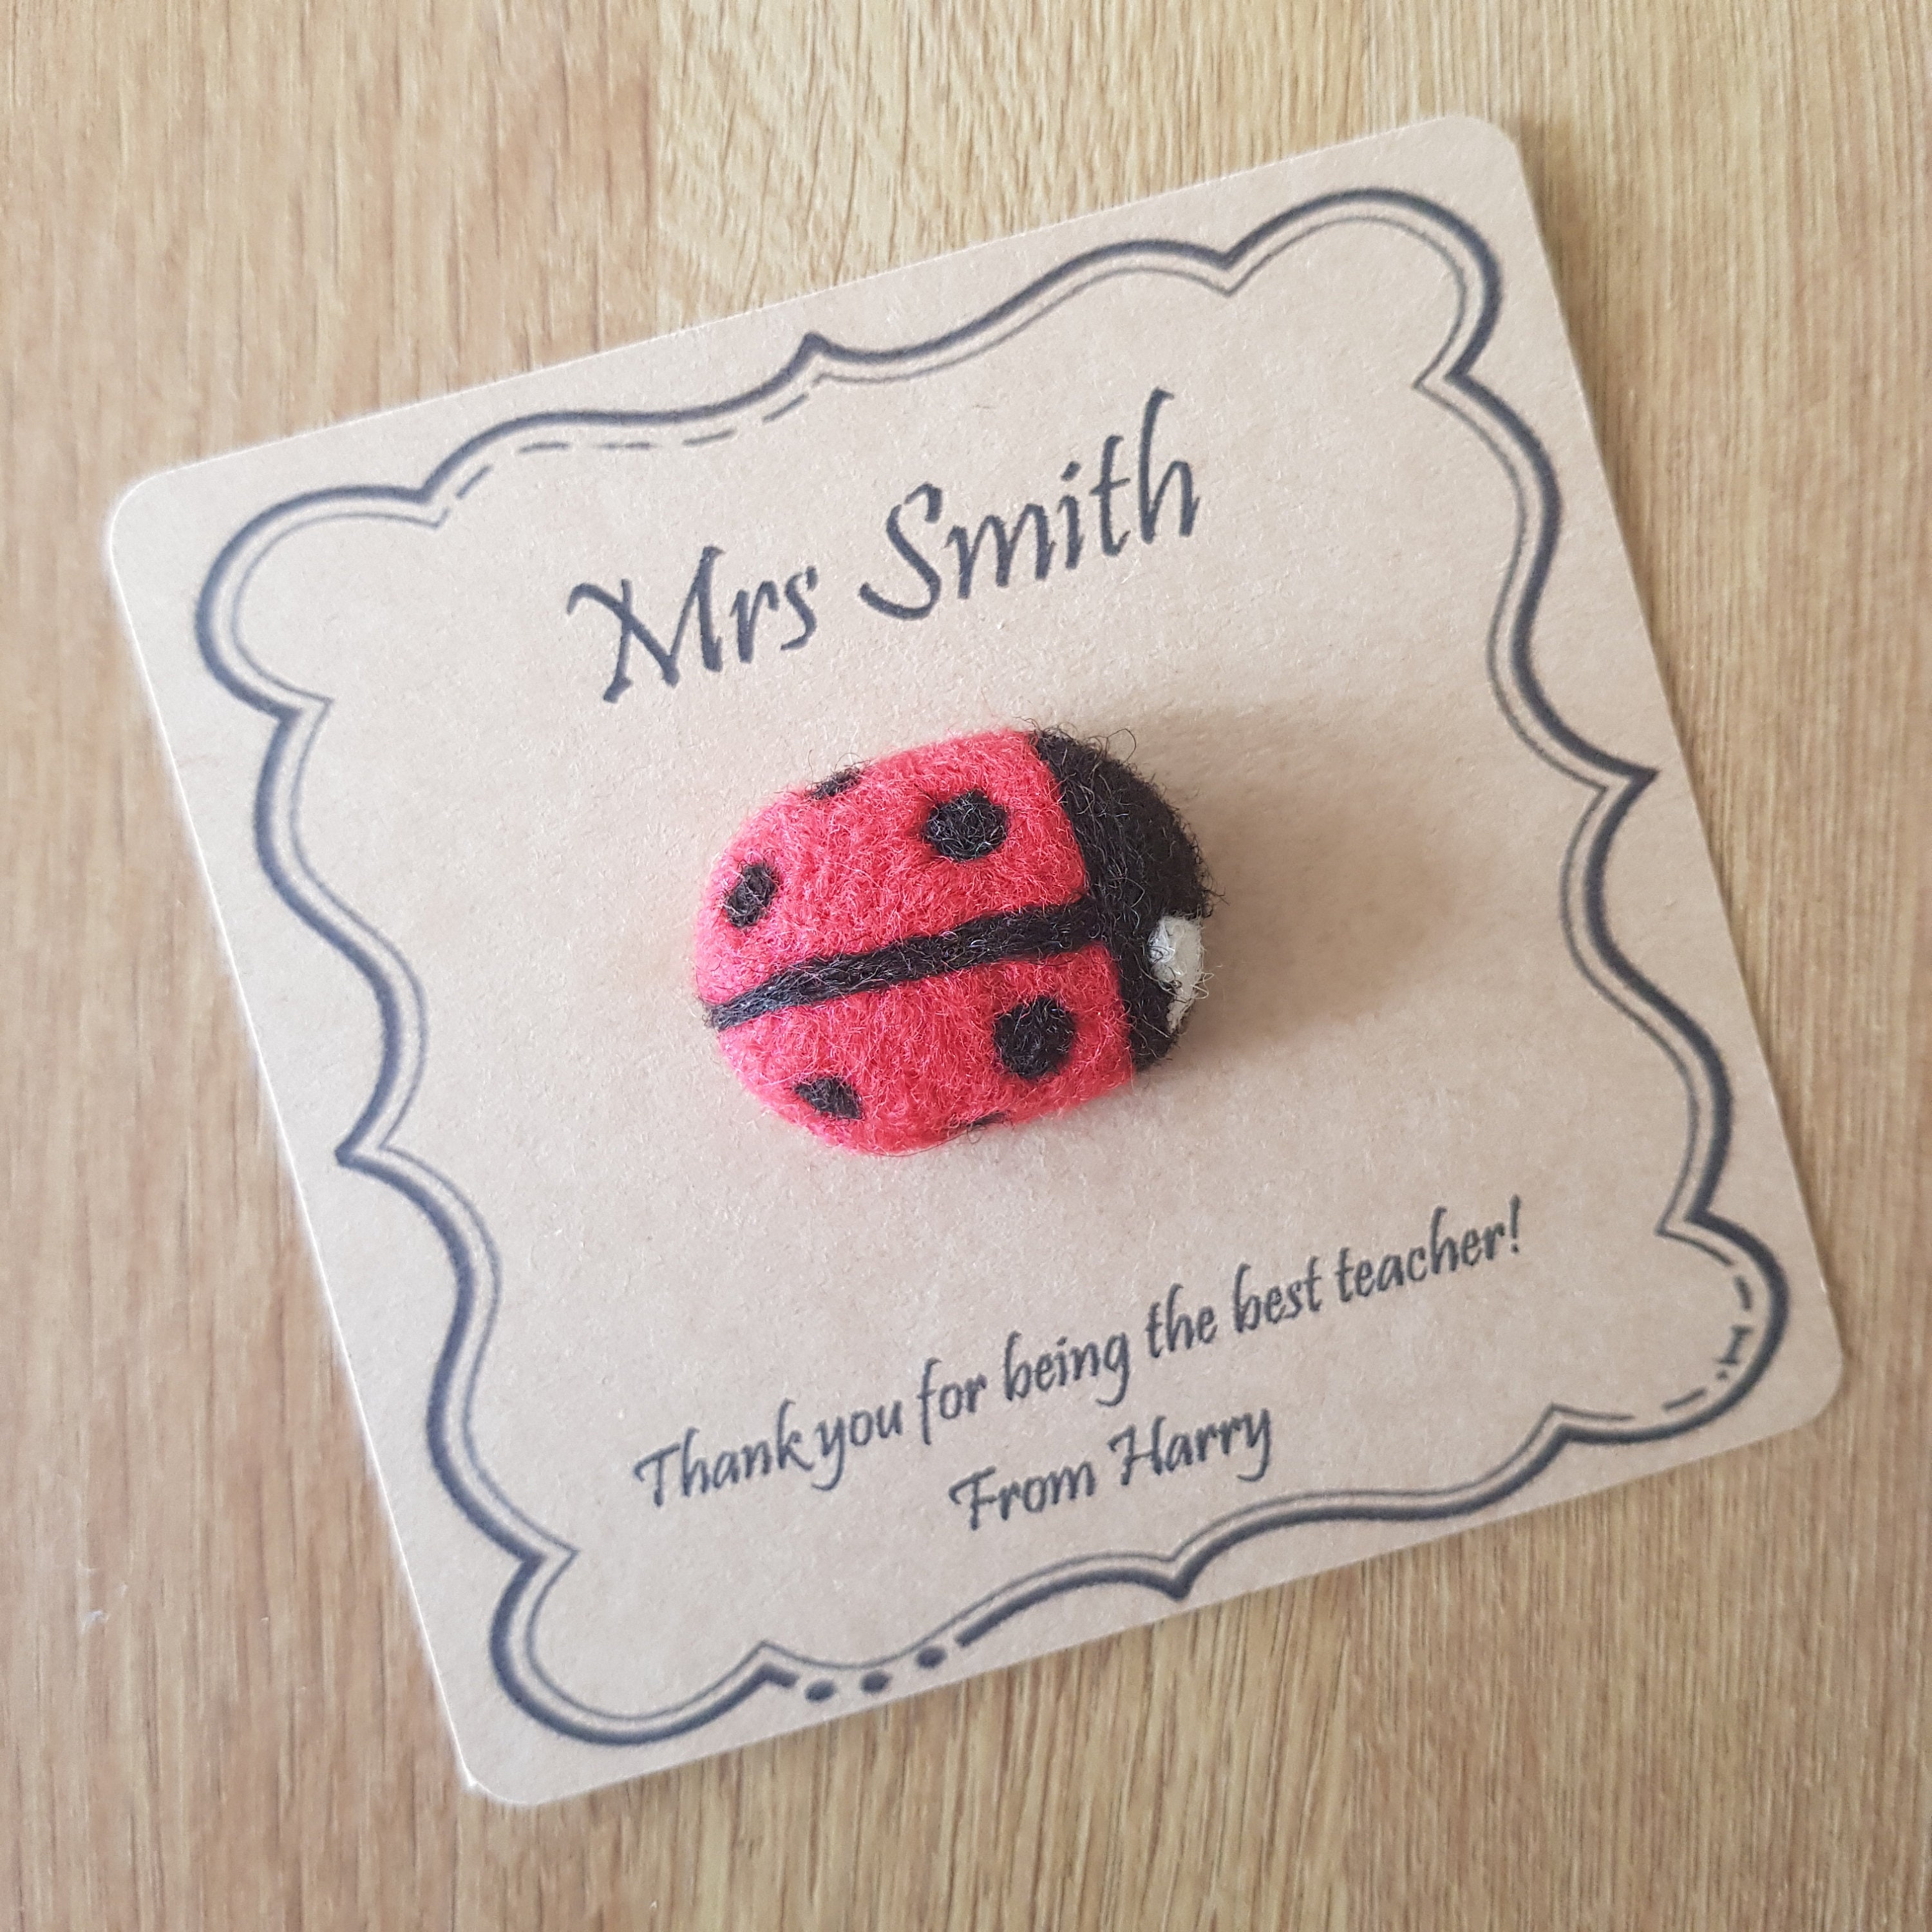 Personalised Gift Needle Felted Ladybird Brooch, Handmade Red & Black With White Heart